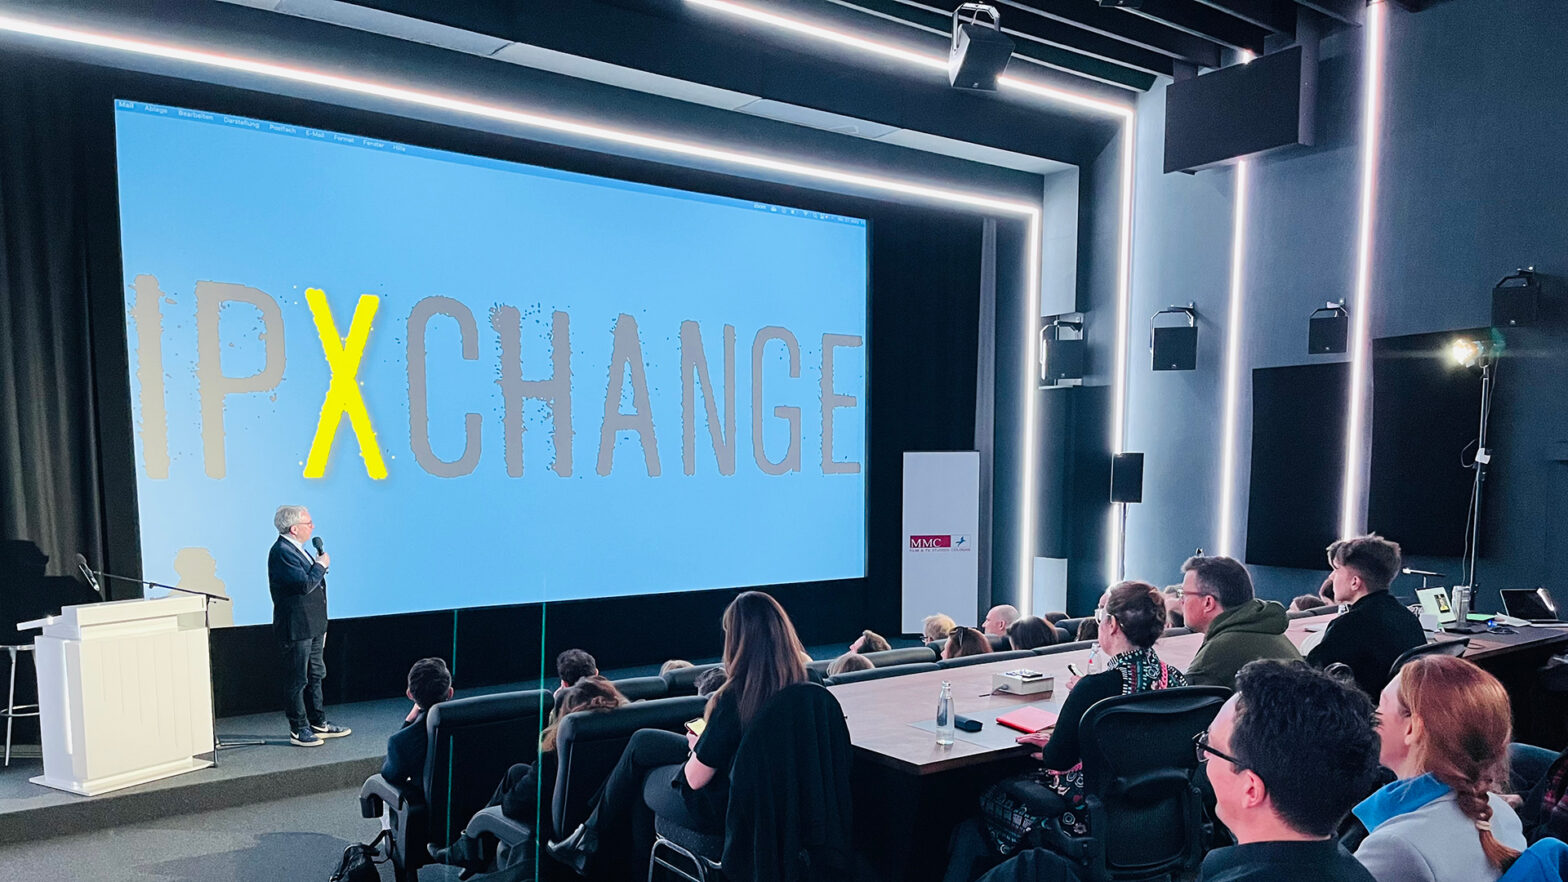 The IPXchange (Independent Producers' Exchange) - sponsored by MMC Studios Cologne - looks back on a successful first edition.